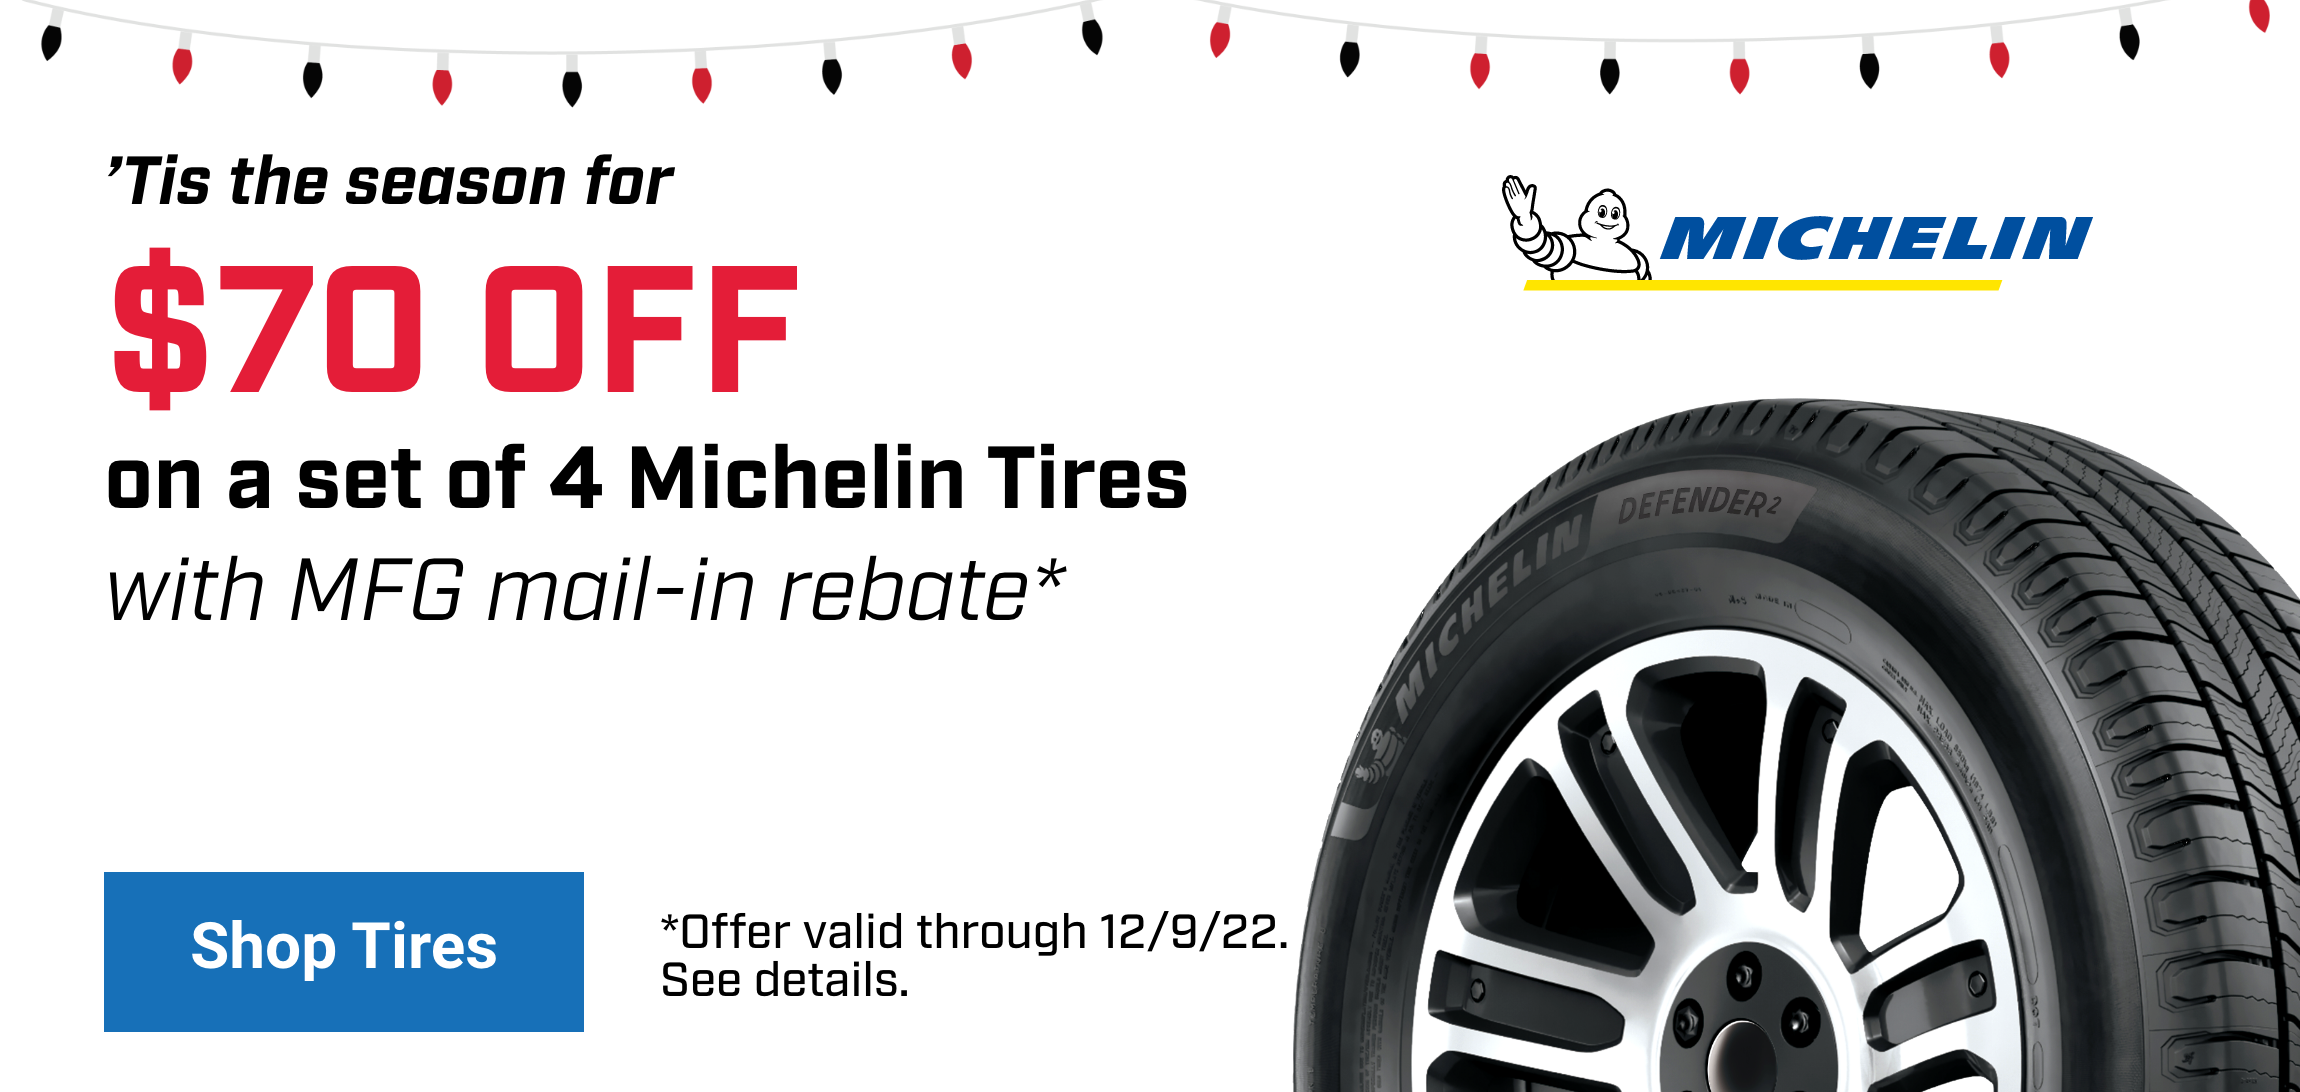 Save up to $70 on Michelin Tires